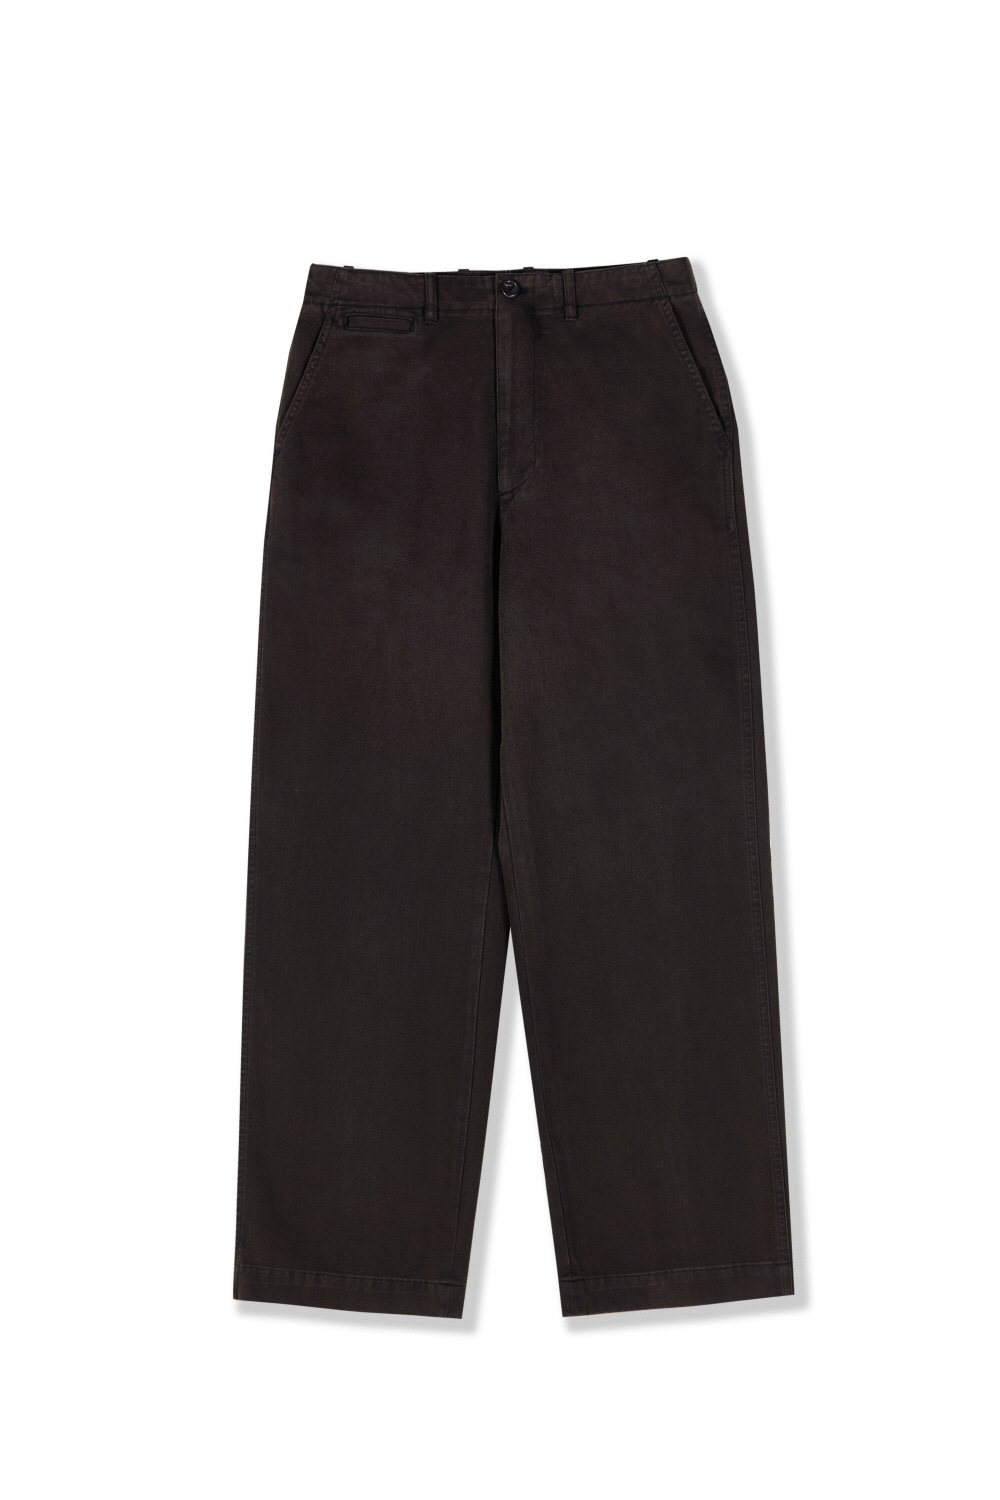 [24&#039;SS] chino trousers(set-up)_charcoal brown